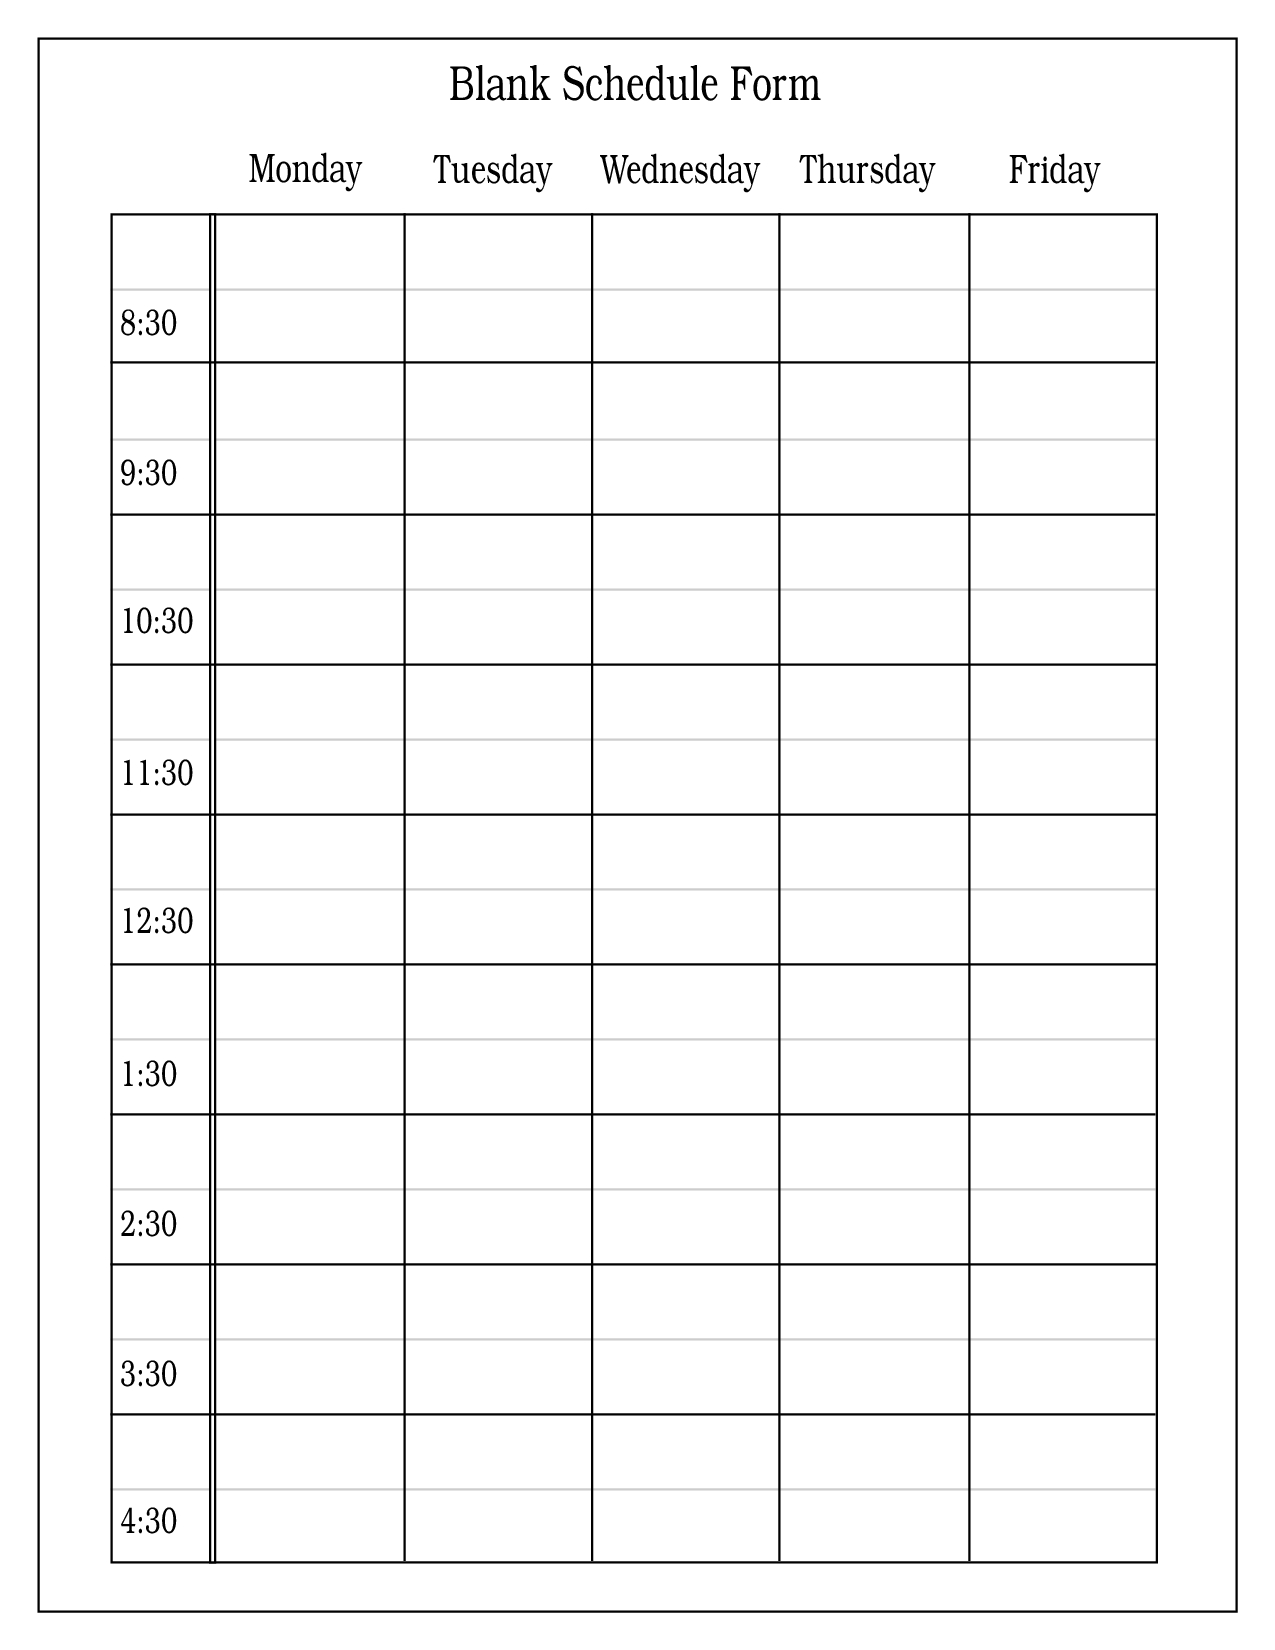 Employee Scheduling - Download A Free Employee Schedule Template For  Blank Schedule Sheet With Times